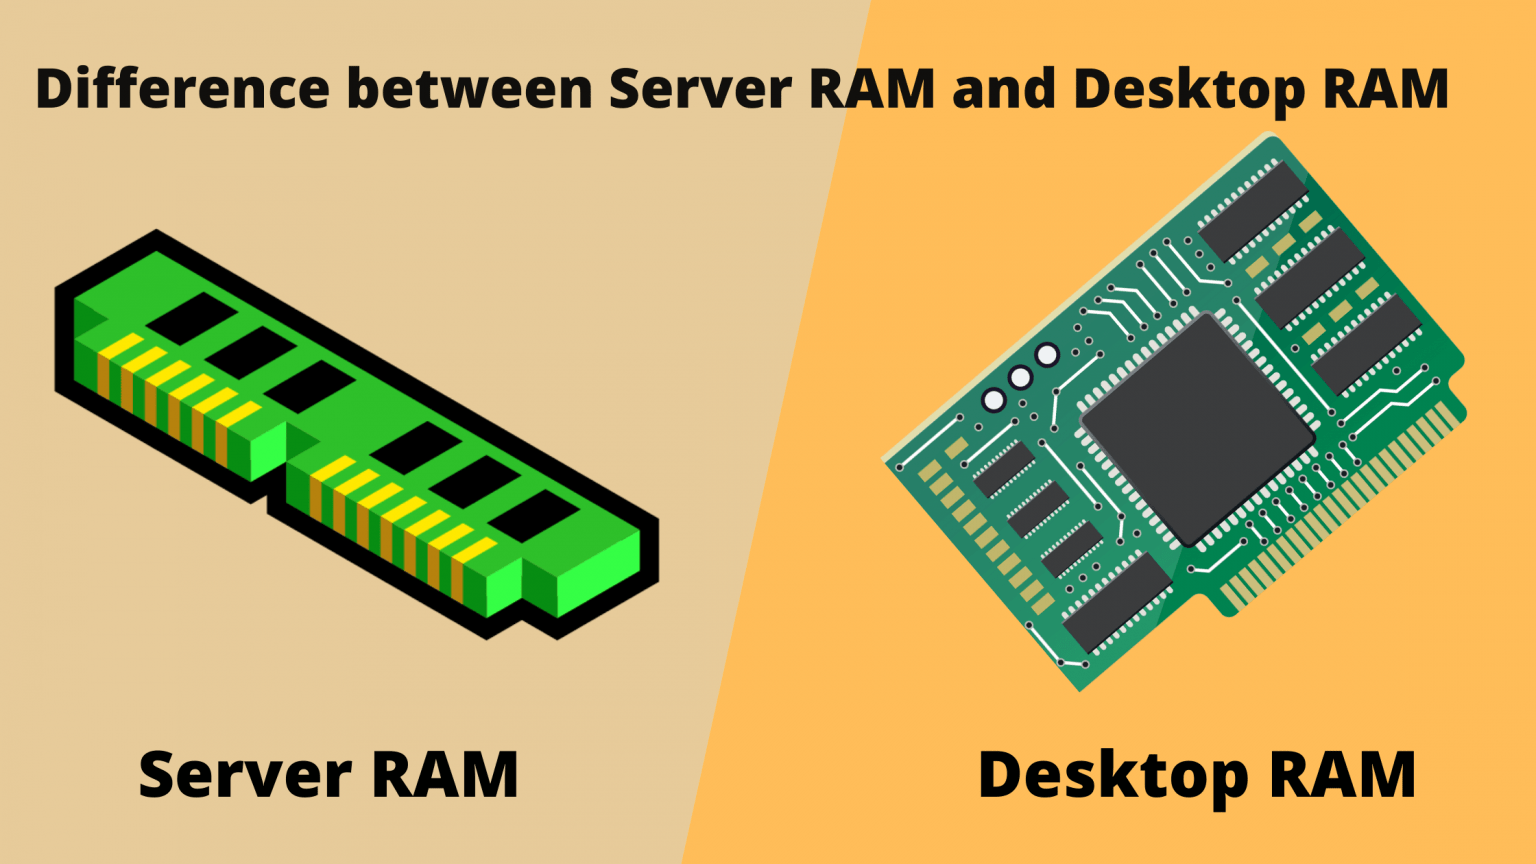 RAM Vs ROM Whats The Difference